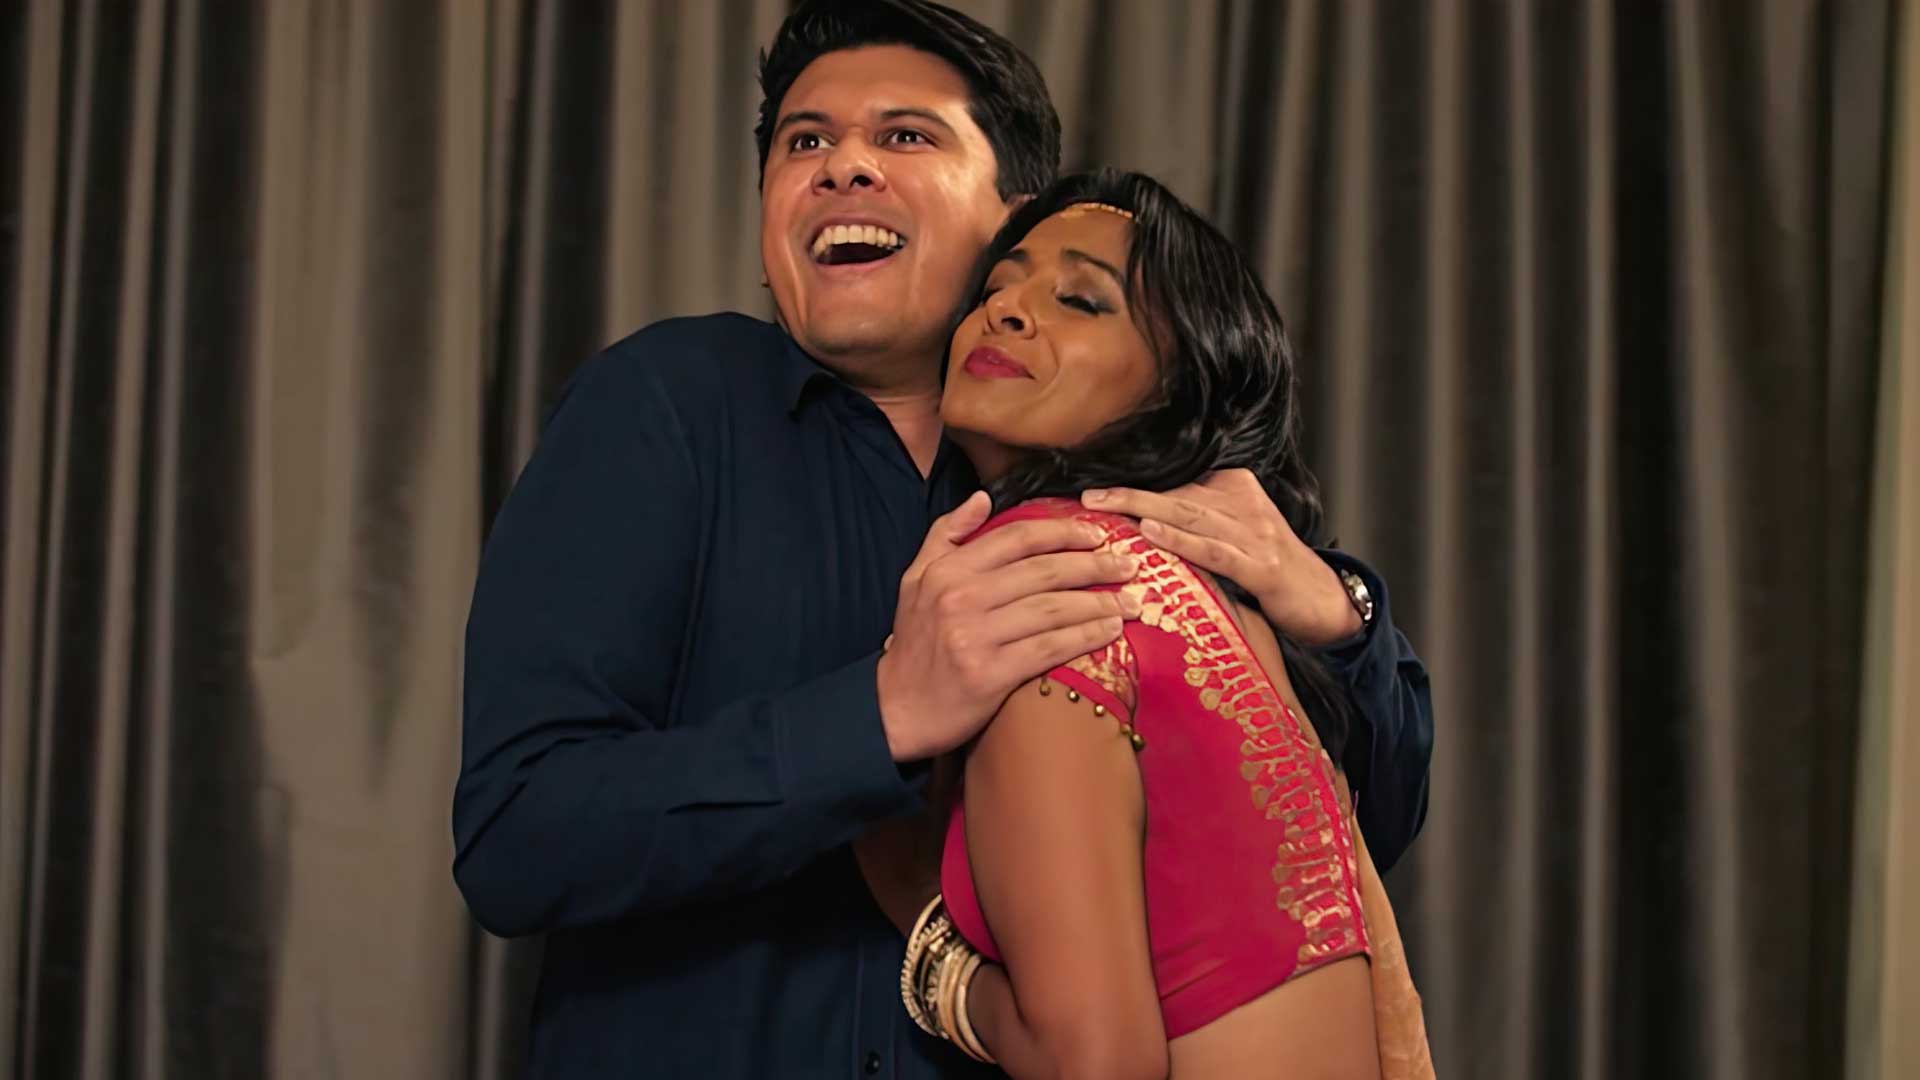 A man and woman dressed like Golden Age Bollywood actors embrace comically in front of a simple taupe-colored curtain.